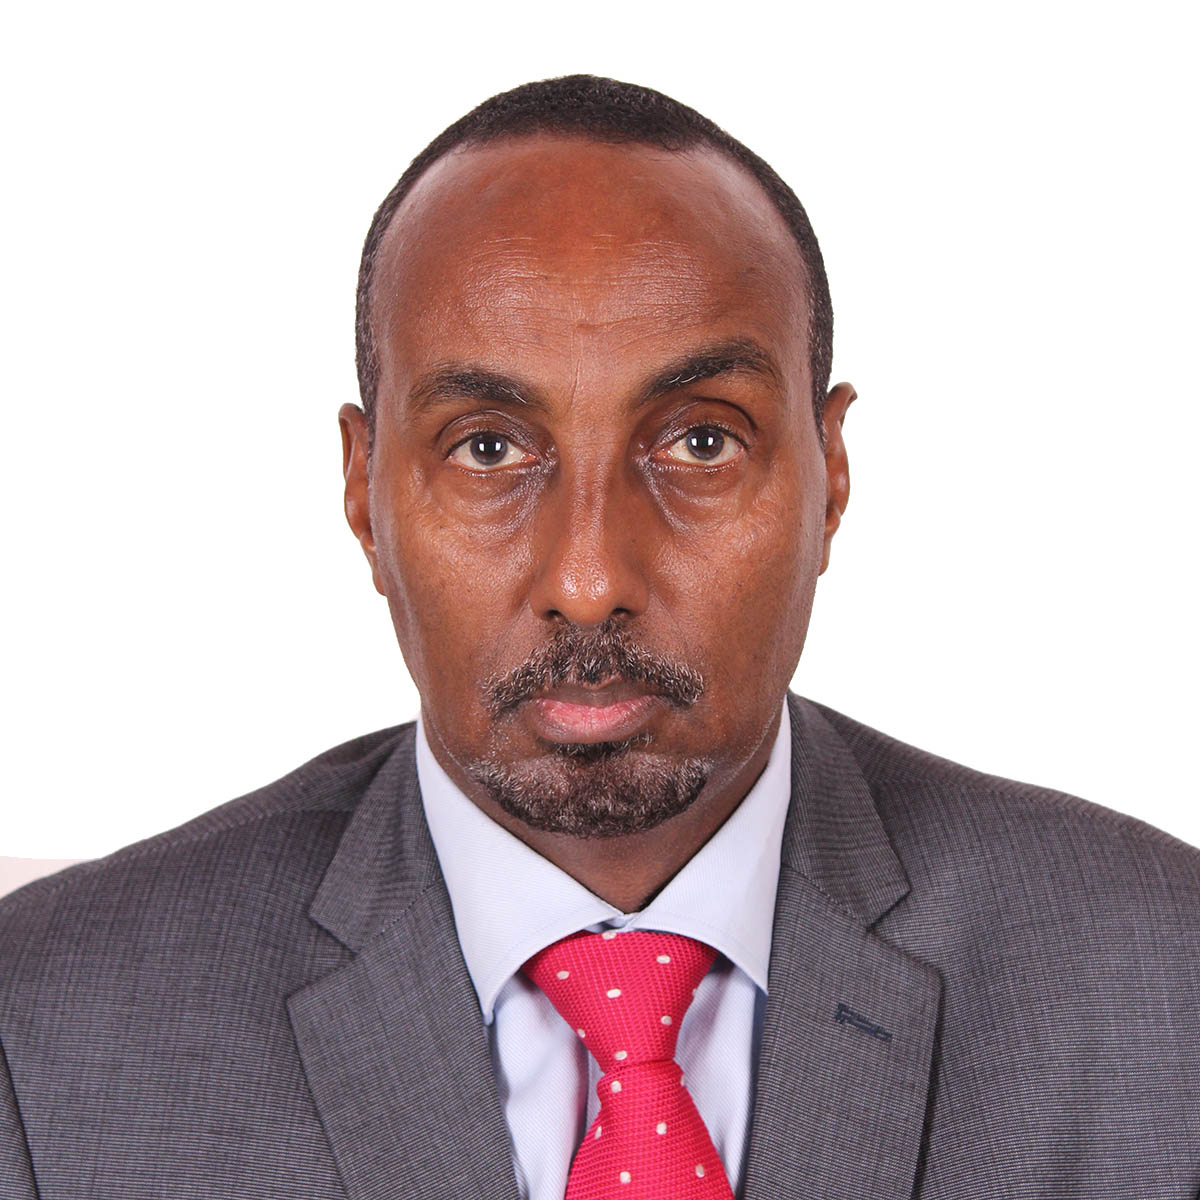 Mr. Abdi Mohamud Ahmed, MBS